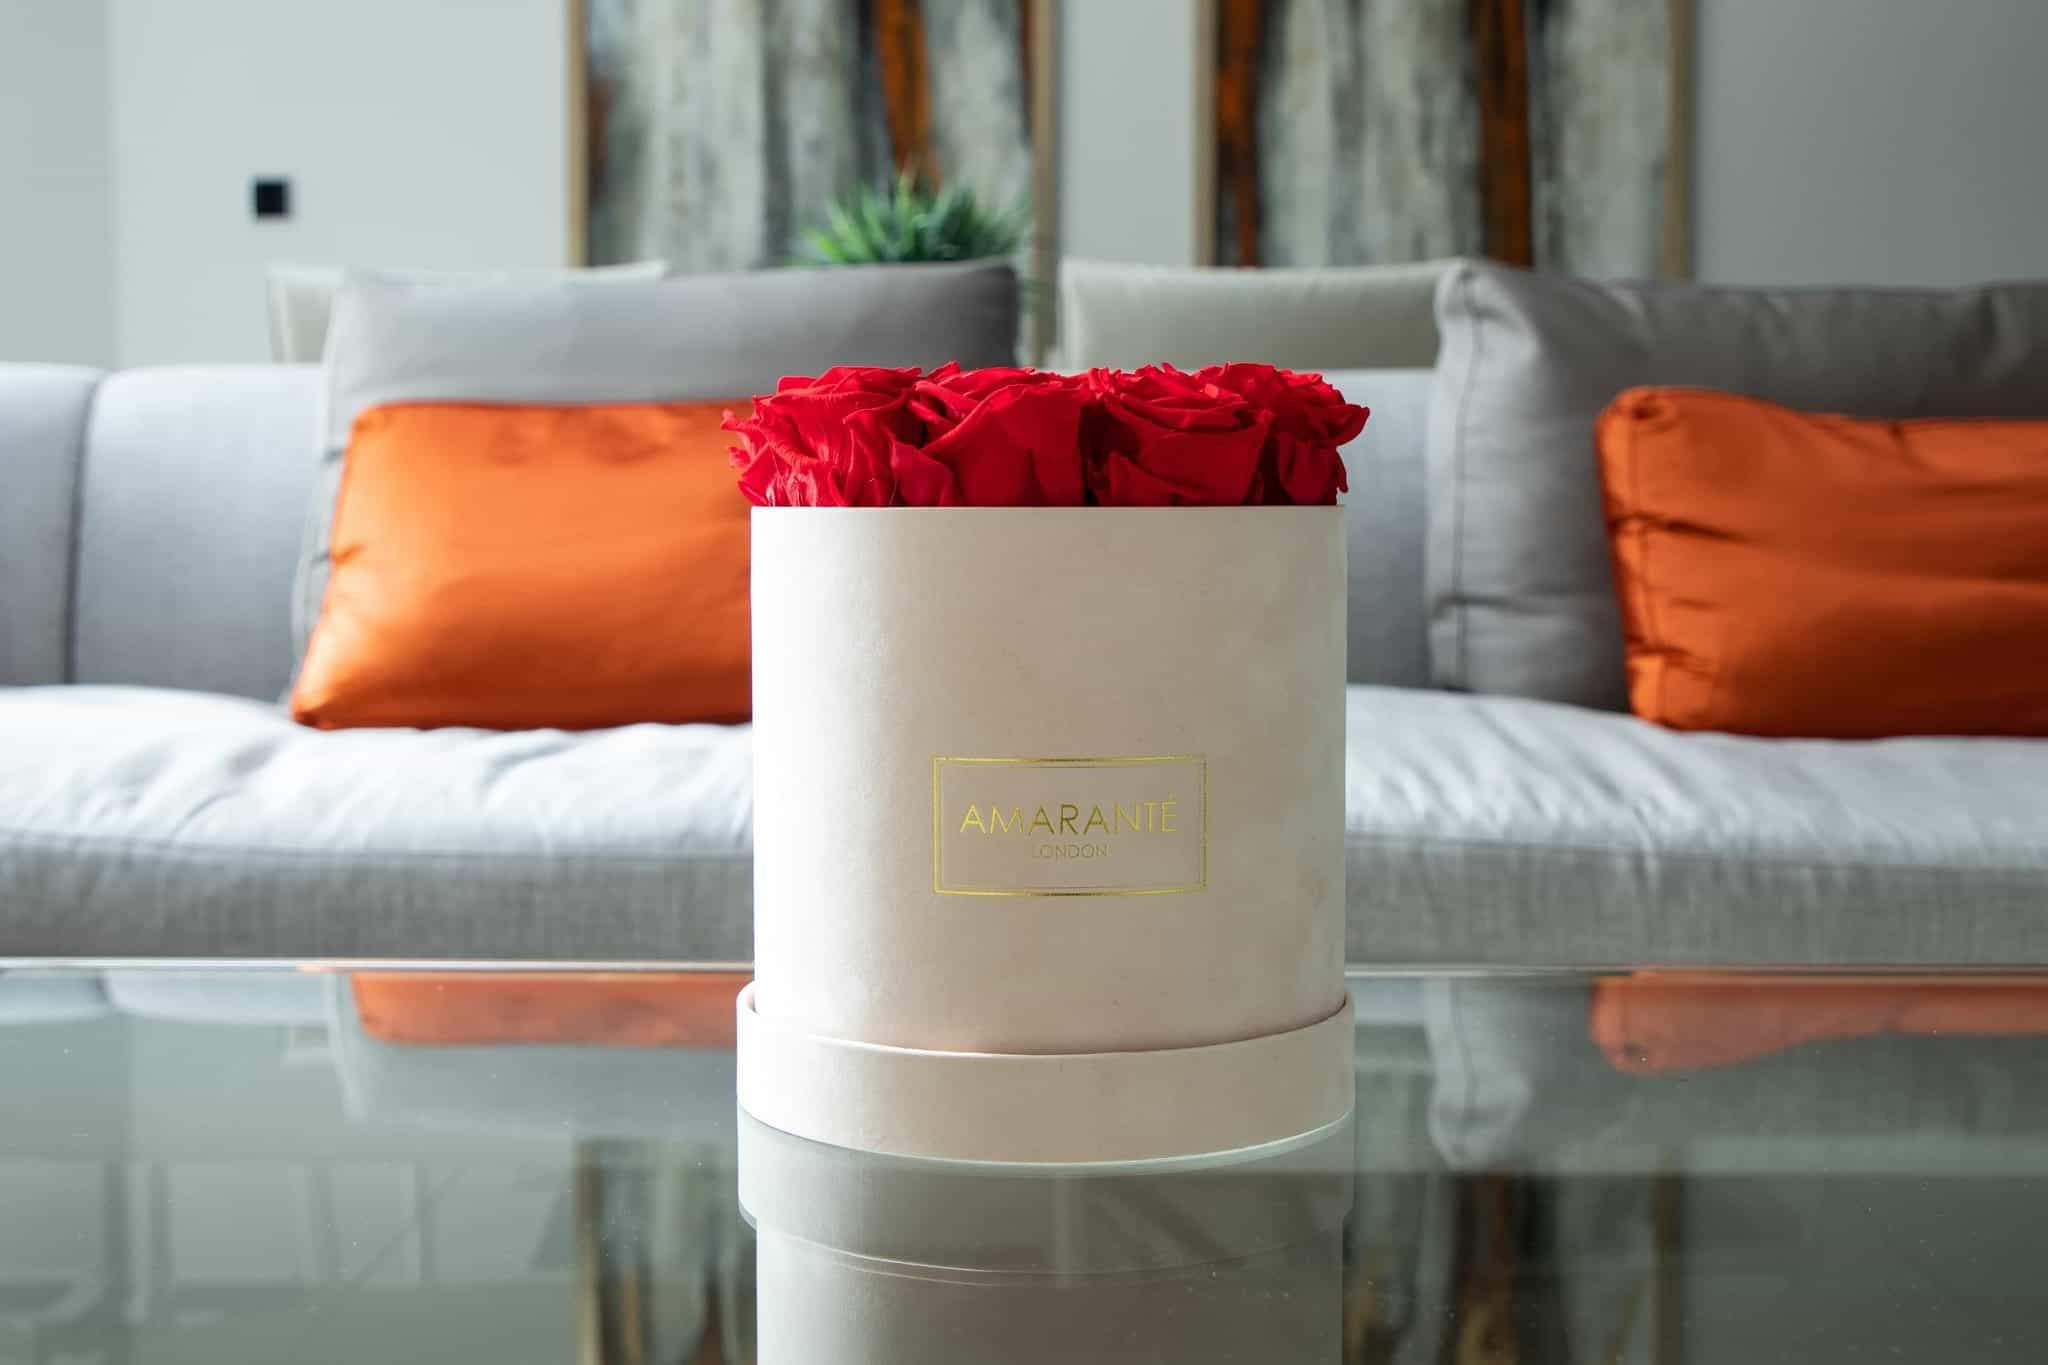 9 Luxury Eternal Rose Arrangements and Centrepieces for your Home or Office